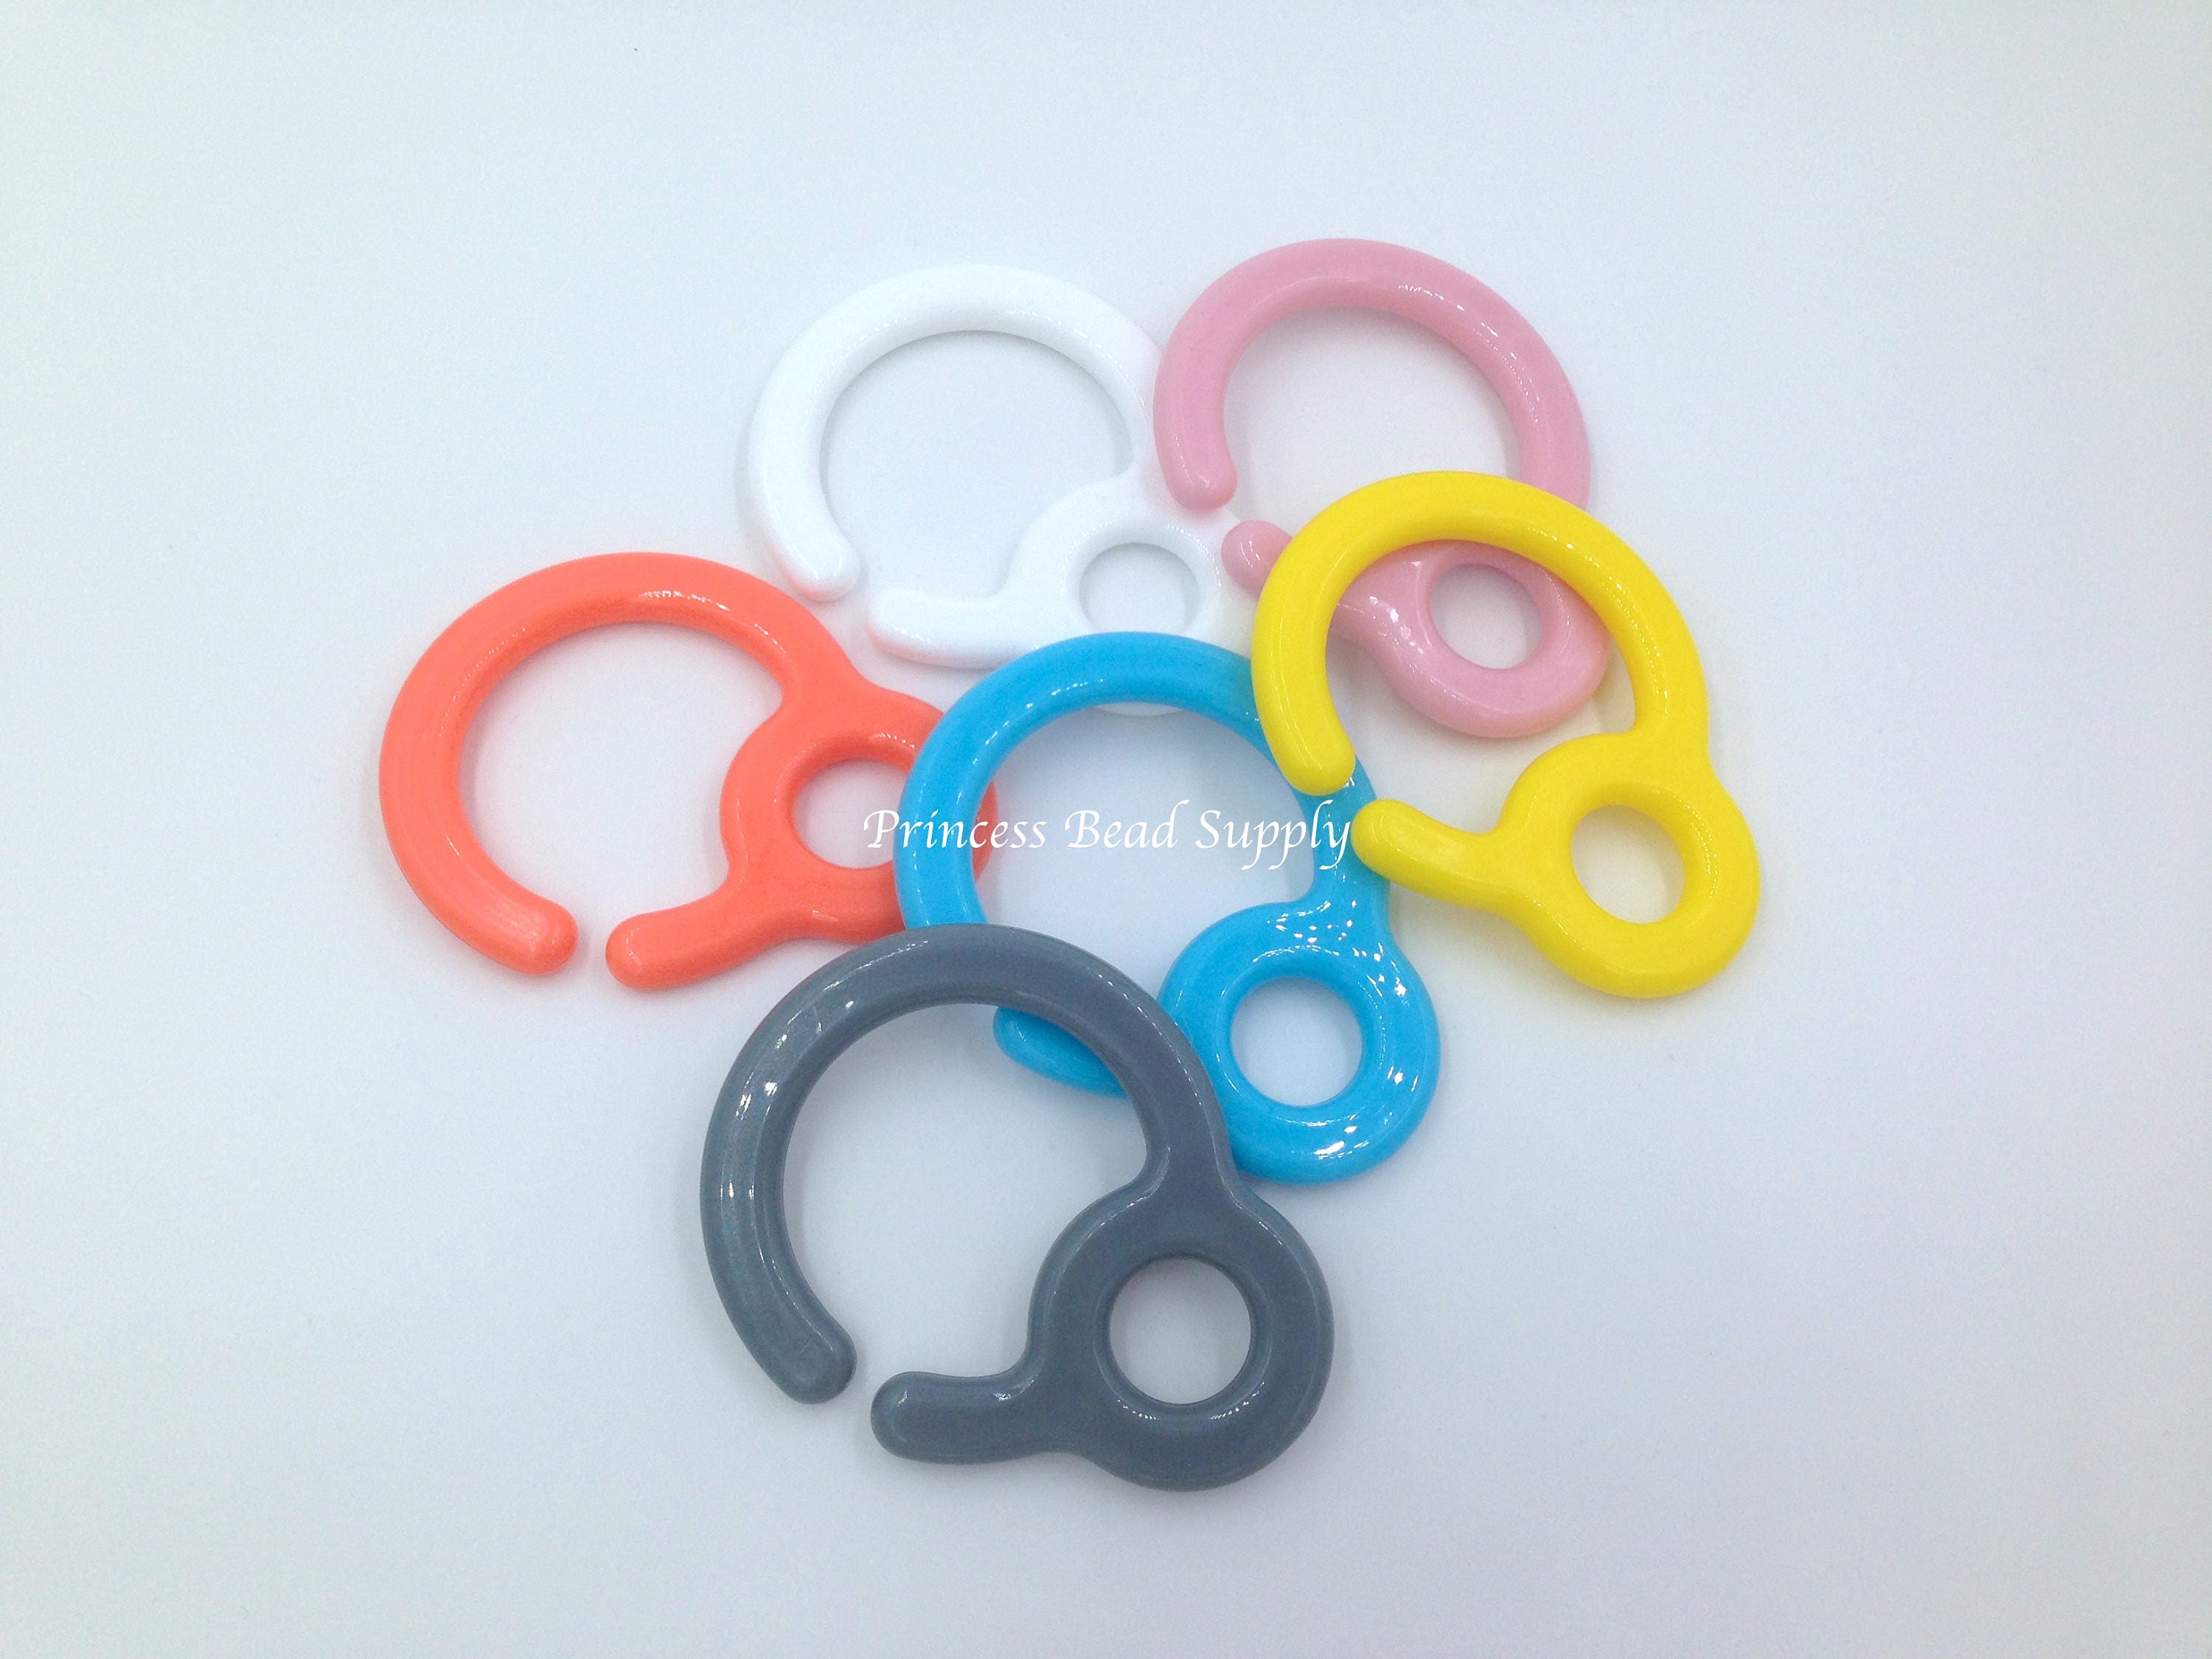 4 inch Clear Plastic Acrylic Craft Rings 12 Pieces 